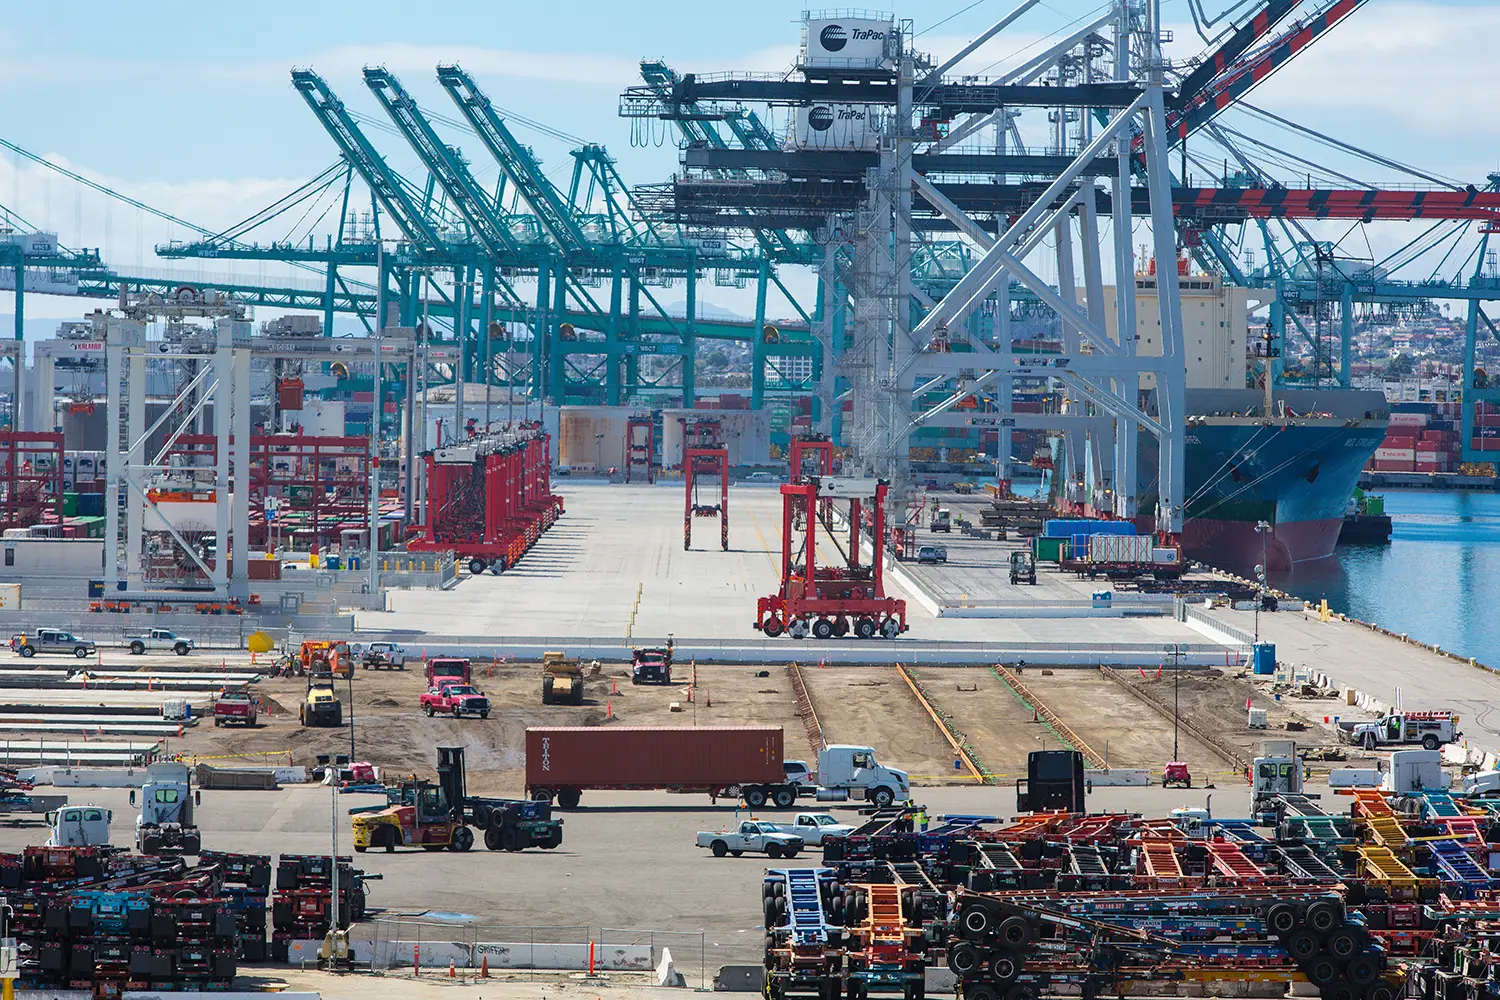 A bustling shipping port with large container cranes in the background. In front of them are tall red, automated straddle carriers.